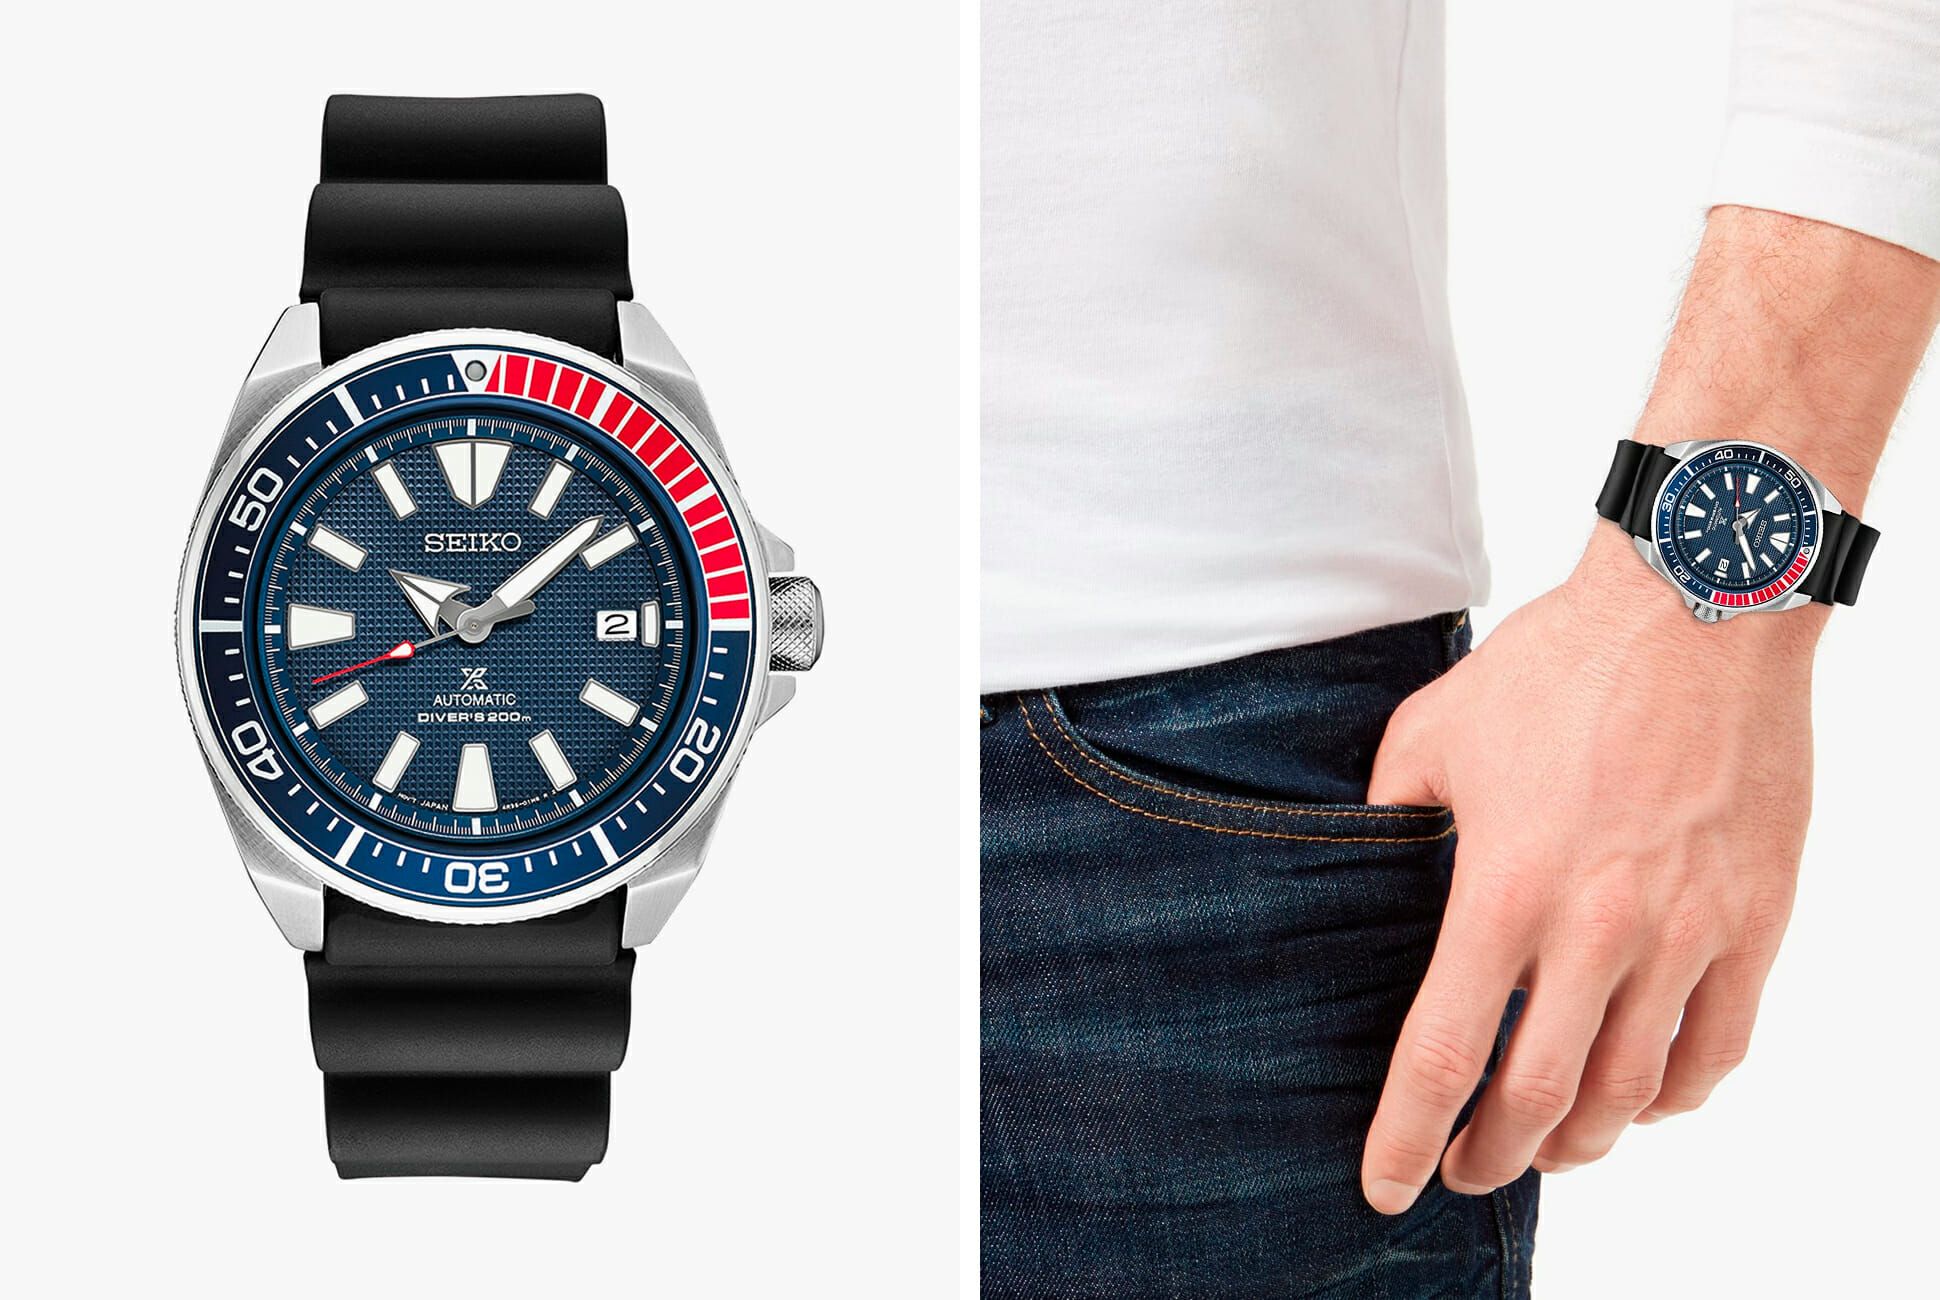 Upgrade to a Serious Automatic Dive Watch for Just $371